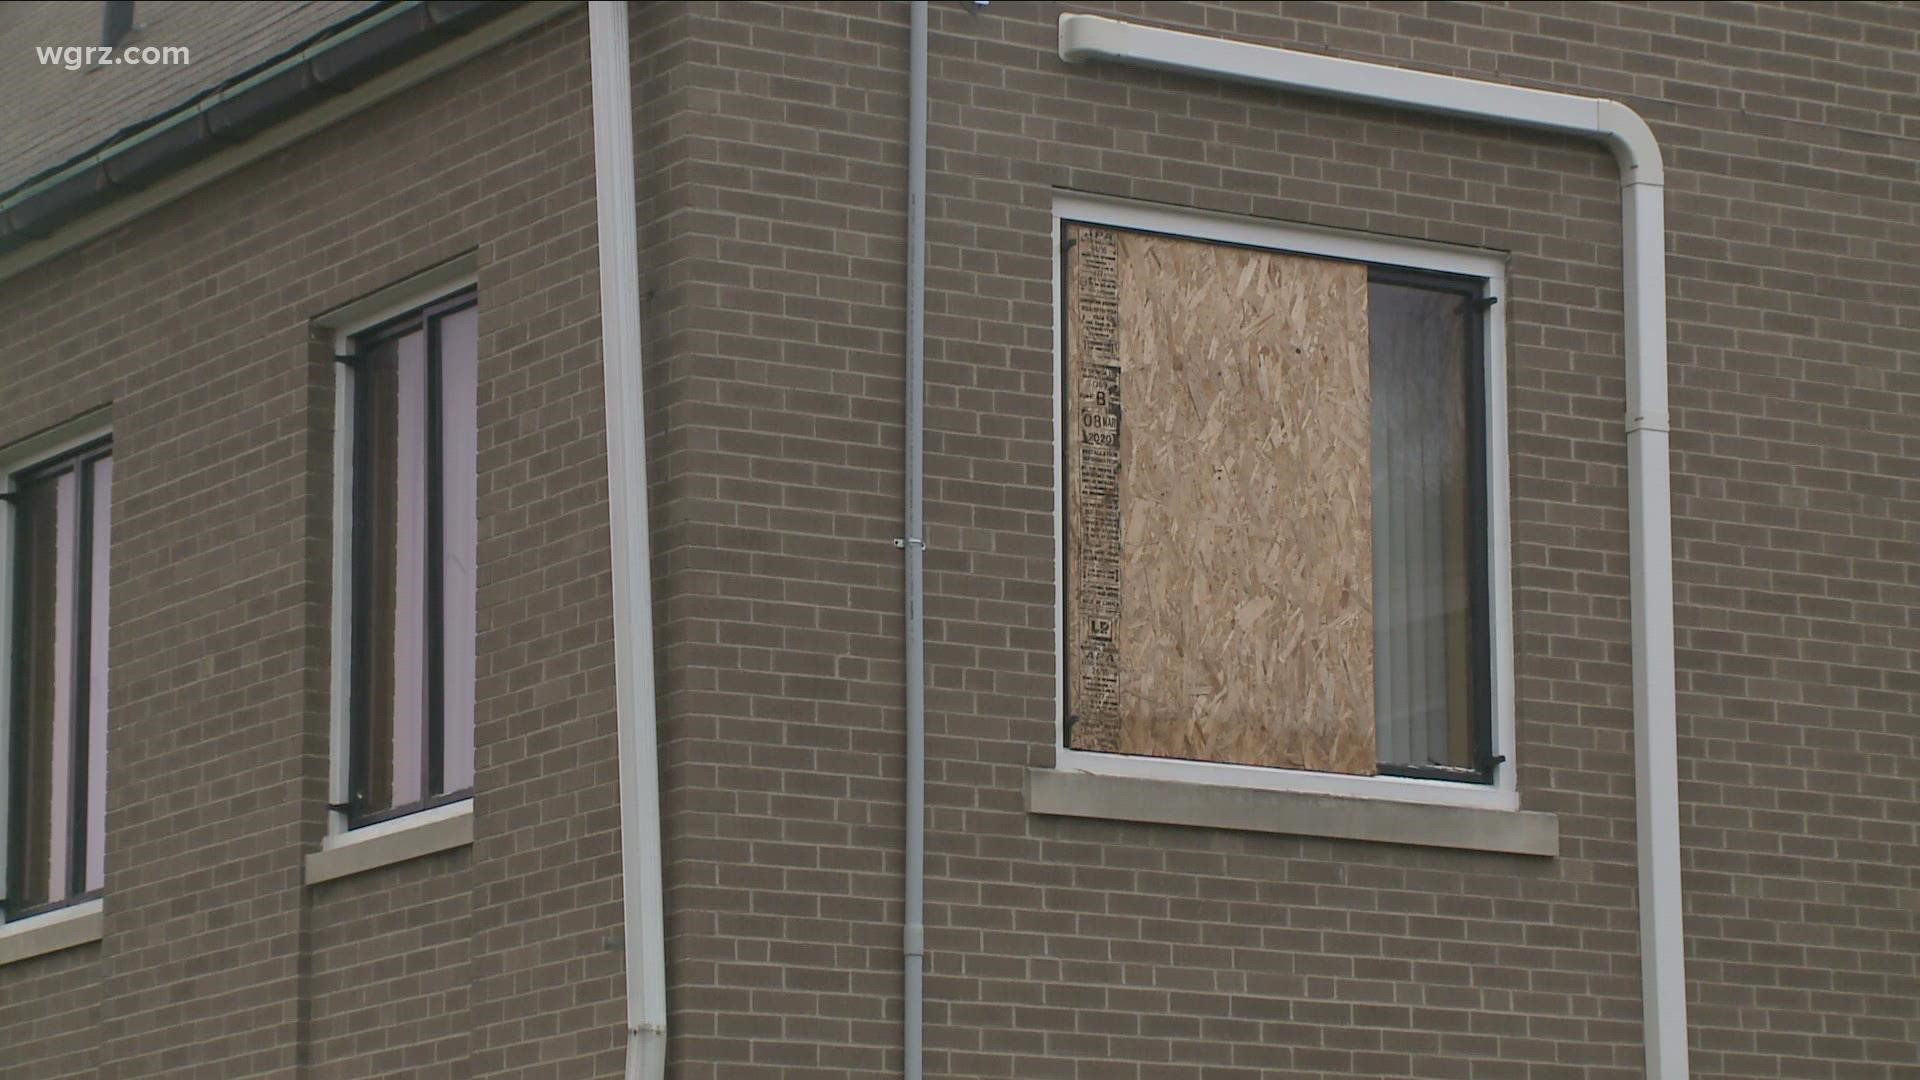 Saint Matthew's United Church of Christ was broken into yesterday afternoon. The vandal broke several windows and set multiple fires in the church.